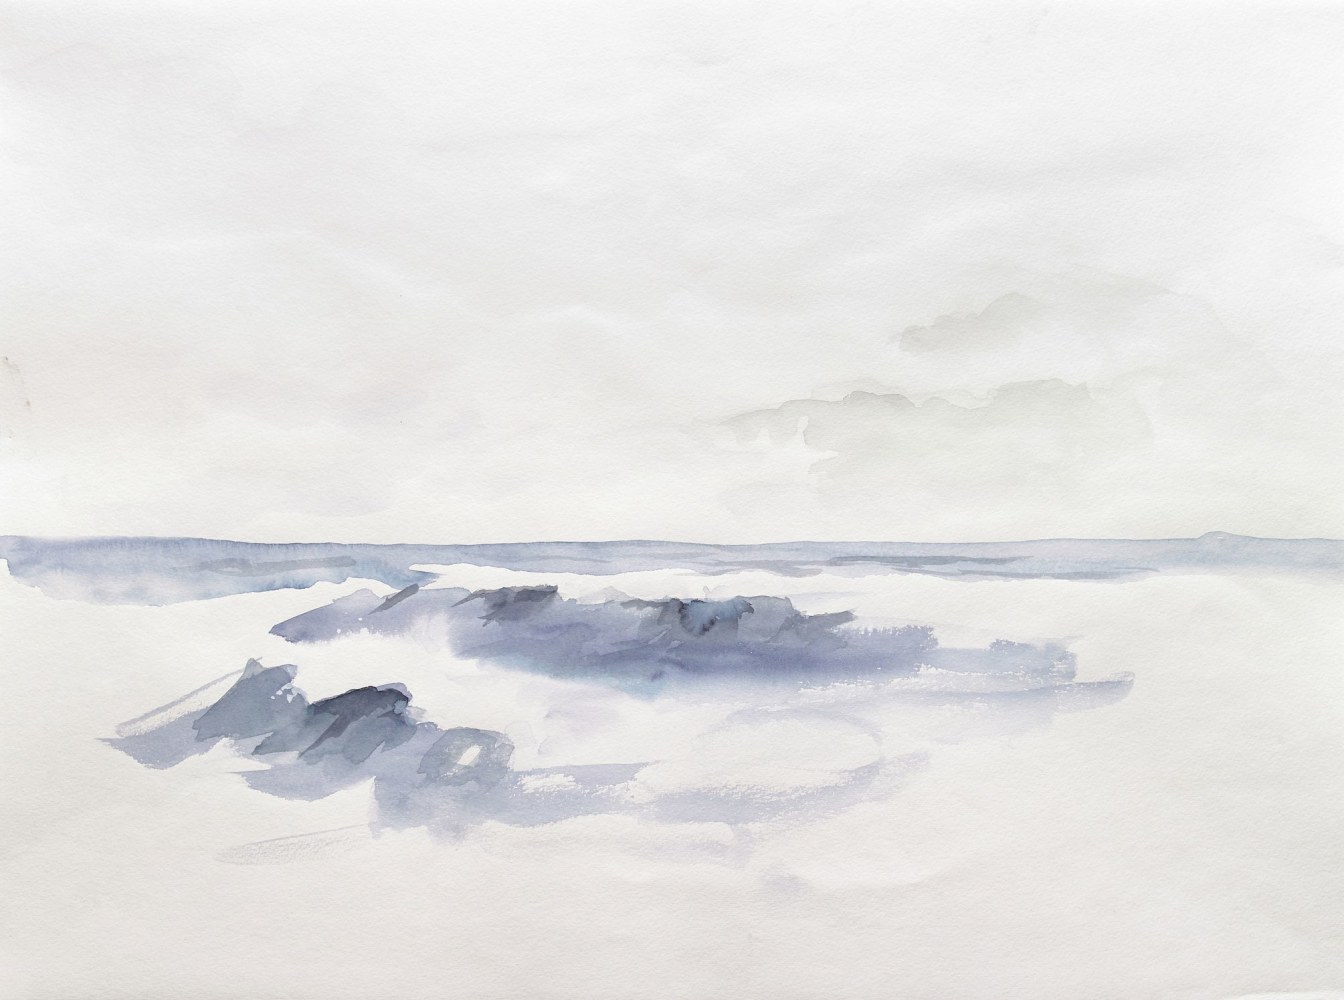 Ragnar Kjartansson
Omnipresent Salty Death, 2015
Watercolor on paper
22 7/8 x 29 7/8 inches
(58 x 76 cm)